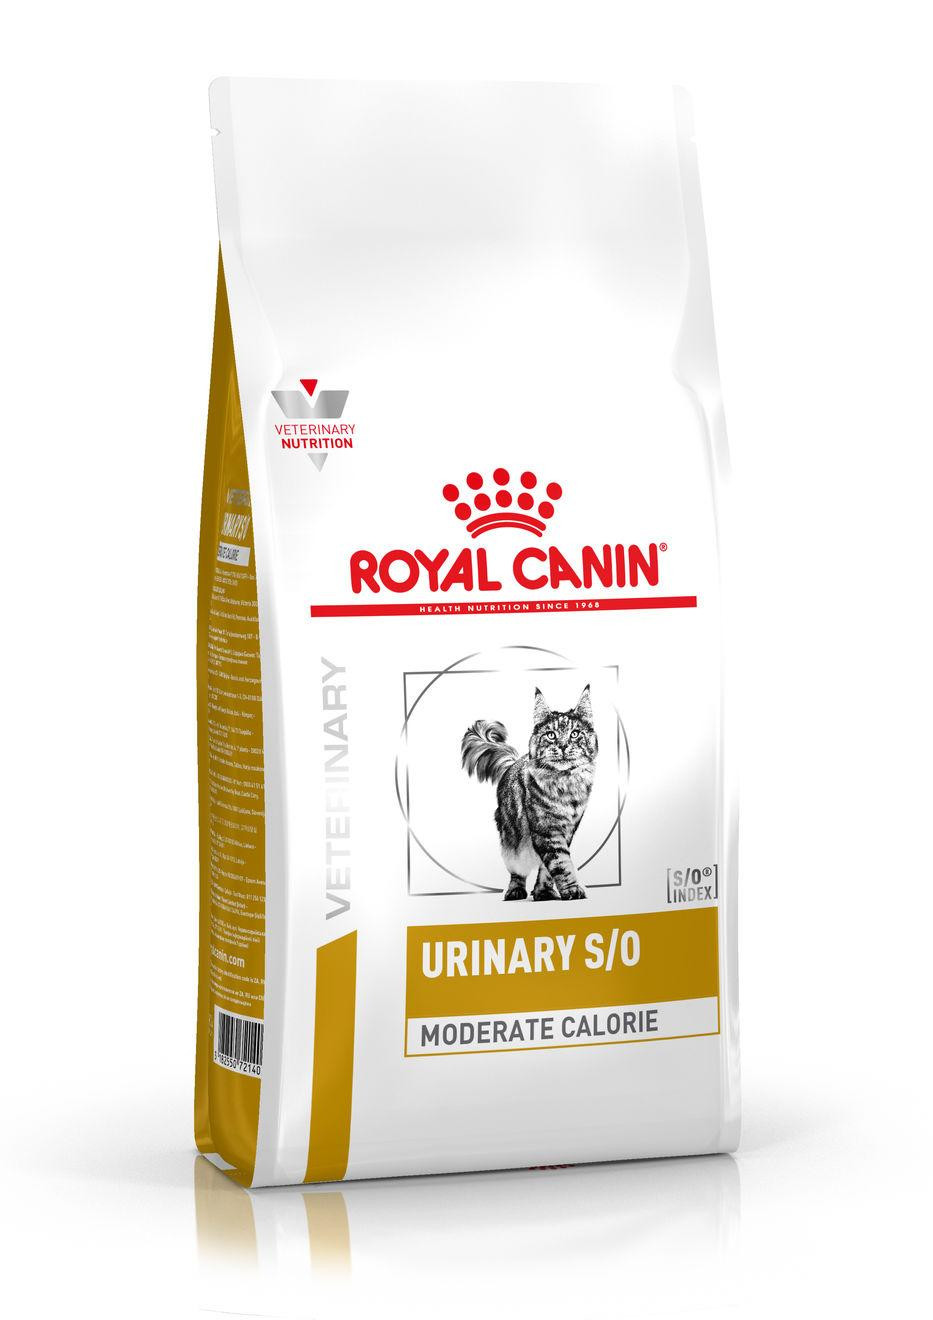 Royal Canin Veterinary Urinary S/O Moderate Calorie pour chat